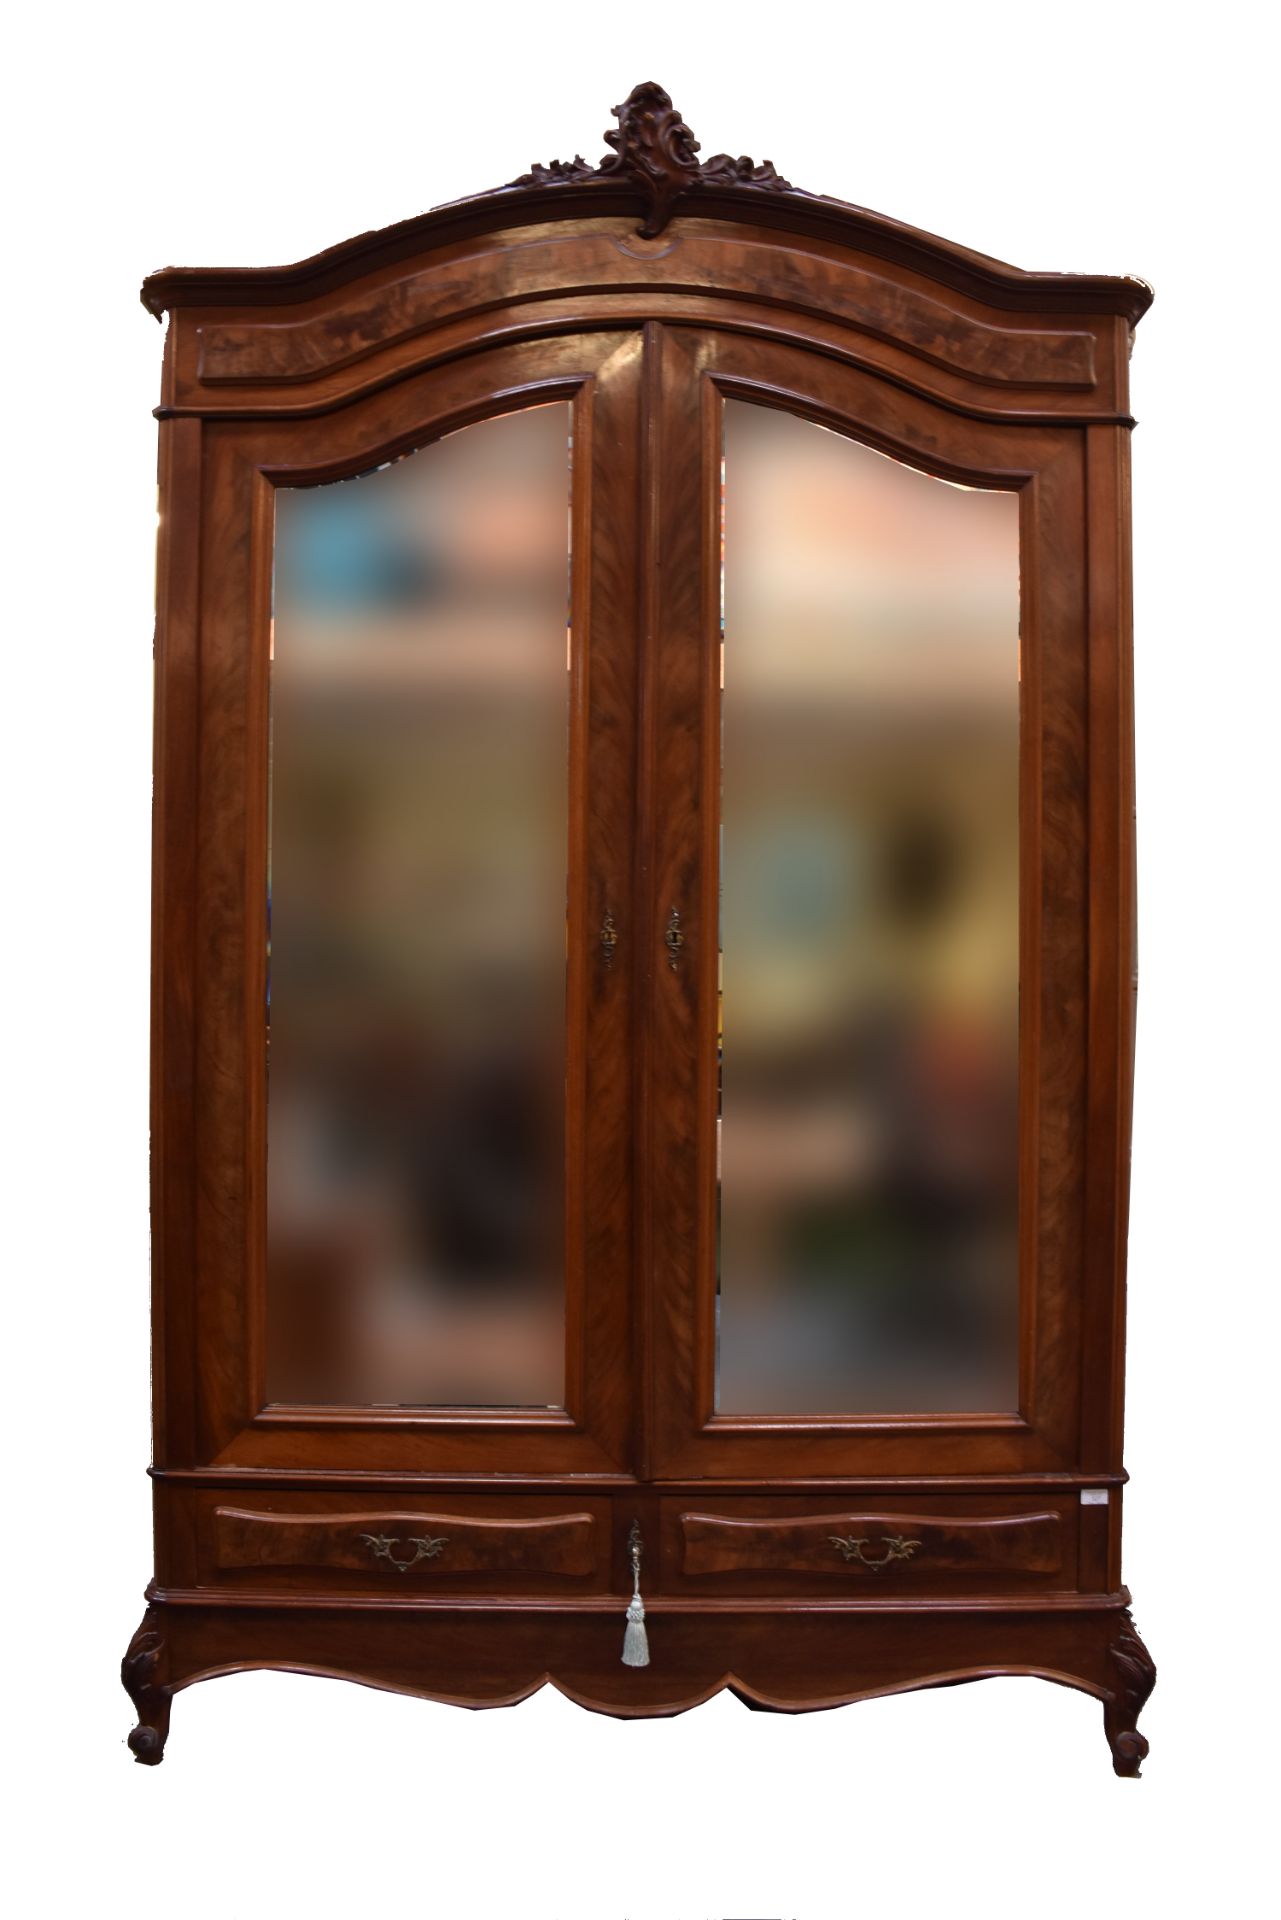 FRENCH 19TH CENTURY LOUIS XV STYLE FRUITWOOD ARMOIRE